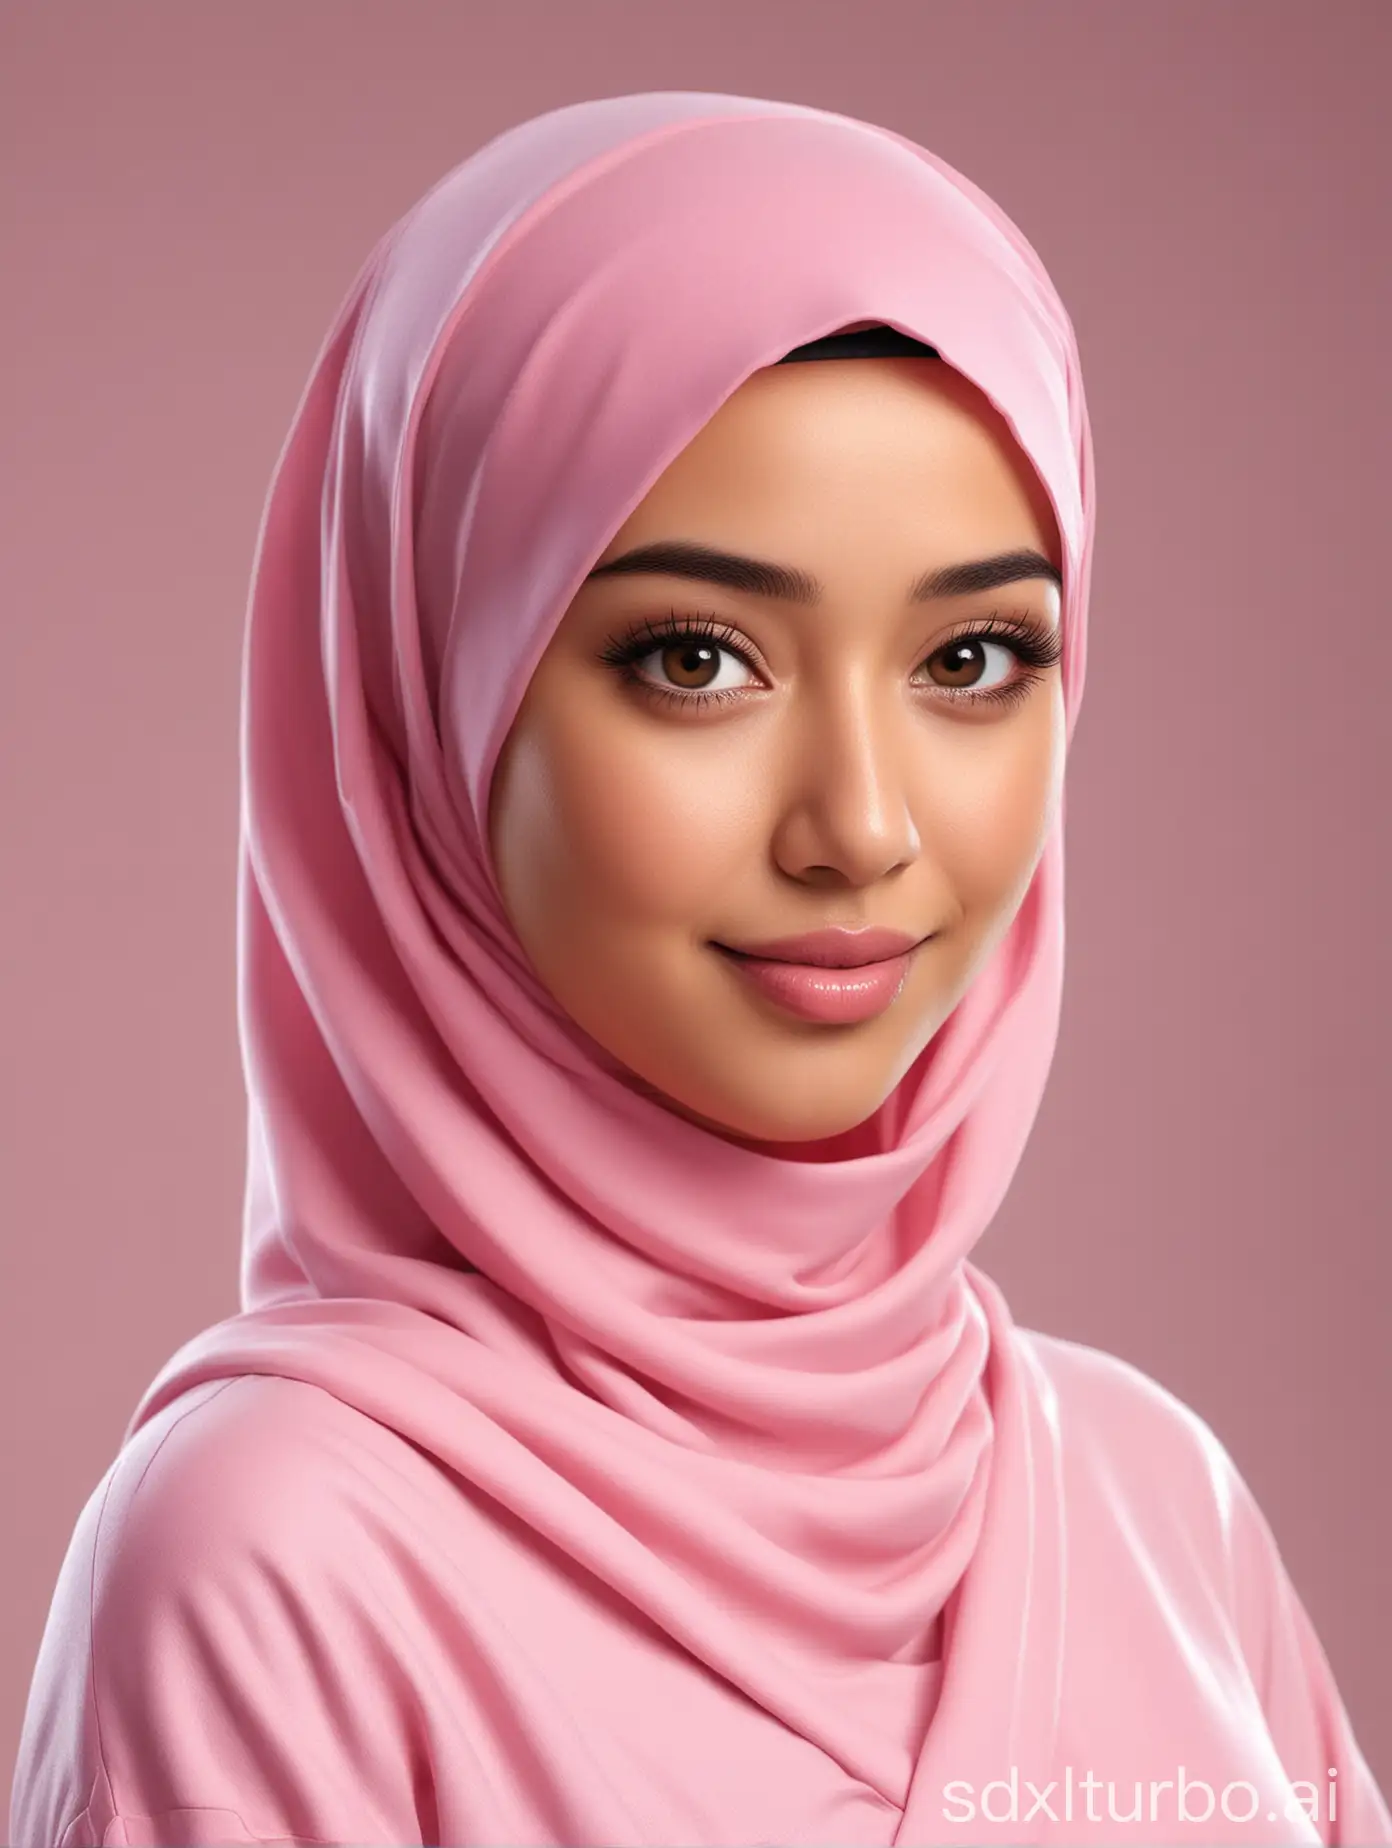 Indonesian-Woman-in-Pink-Hijab-Elegant-Portrait-with-Soft-Lighting